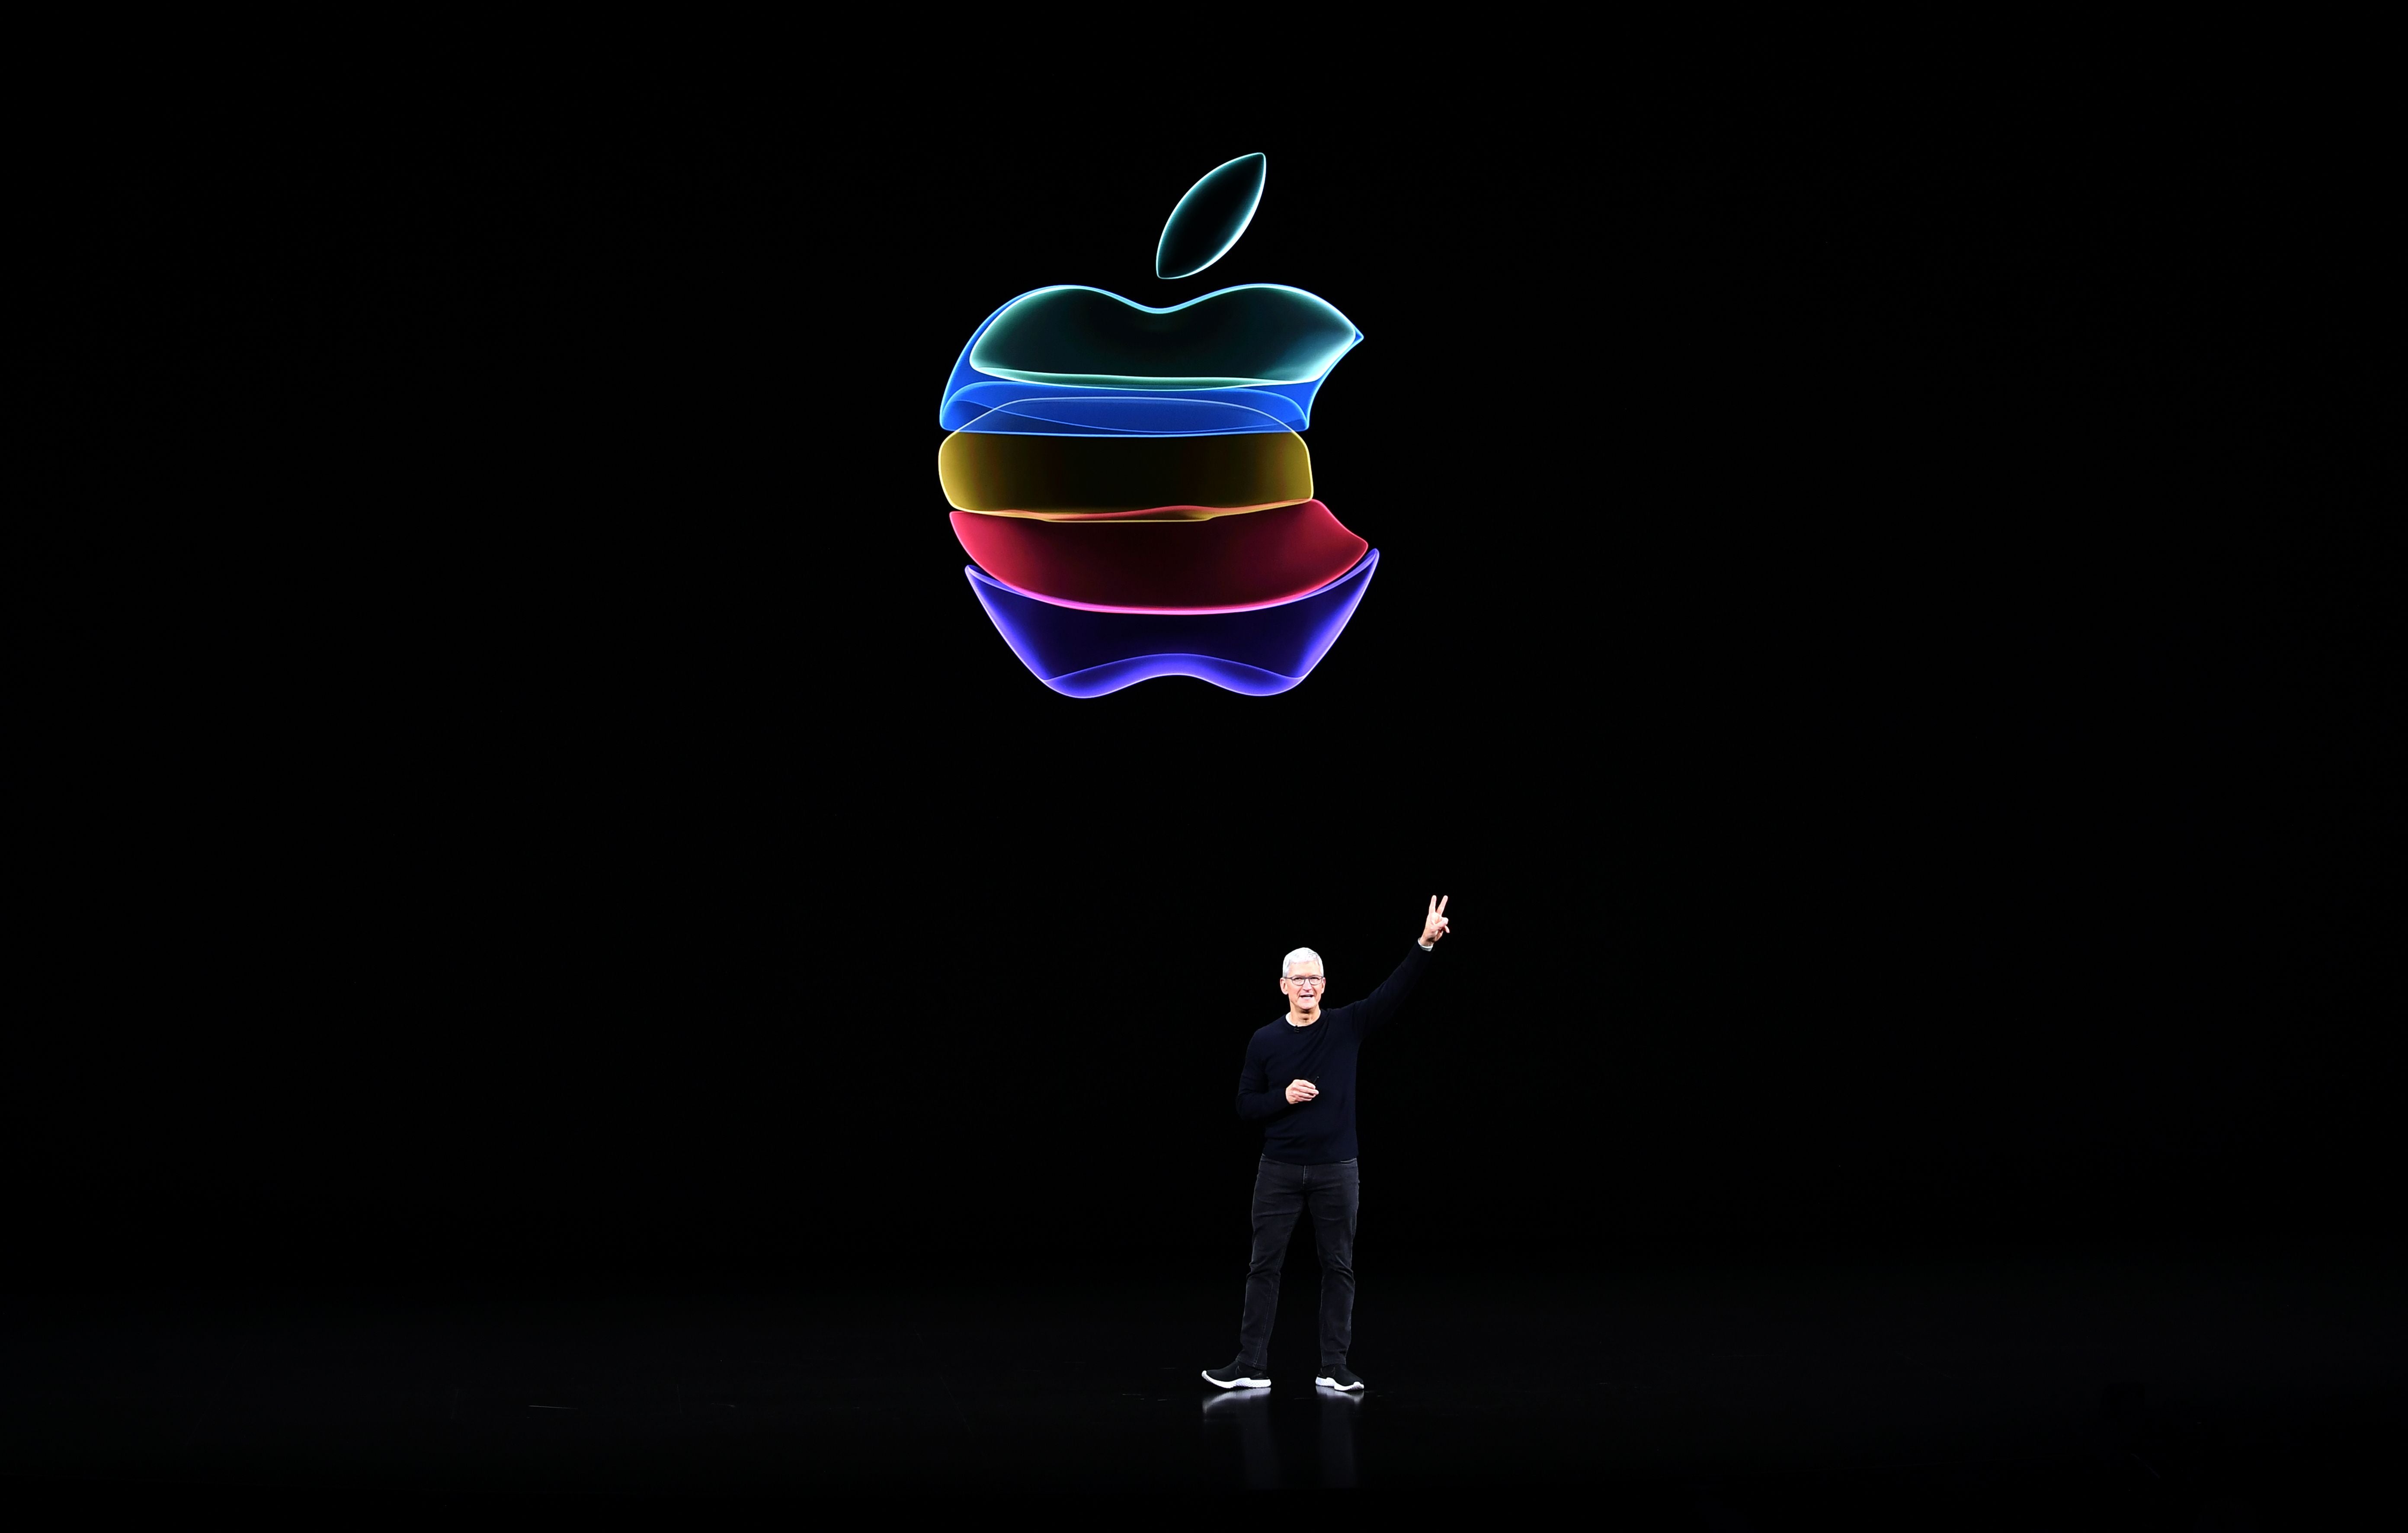 WWDC24: Highlights from Day 4 and Day 5